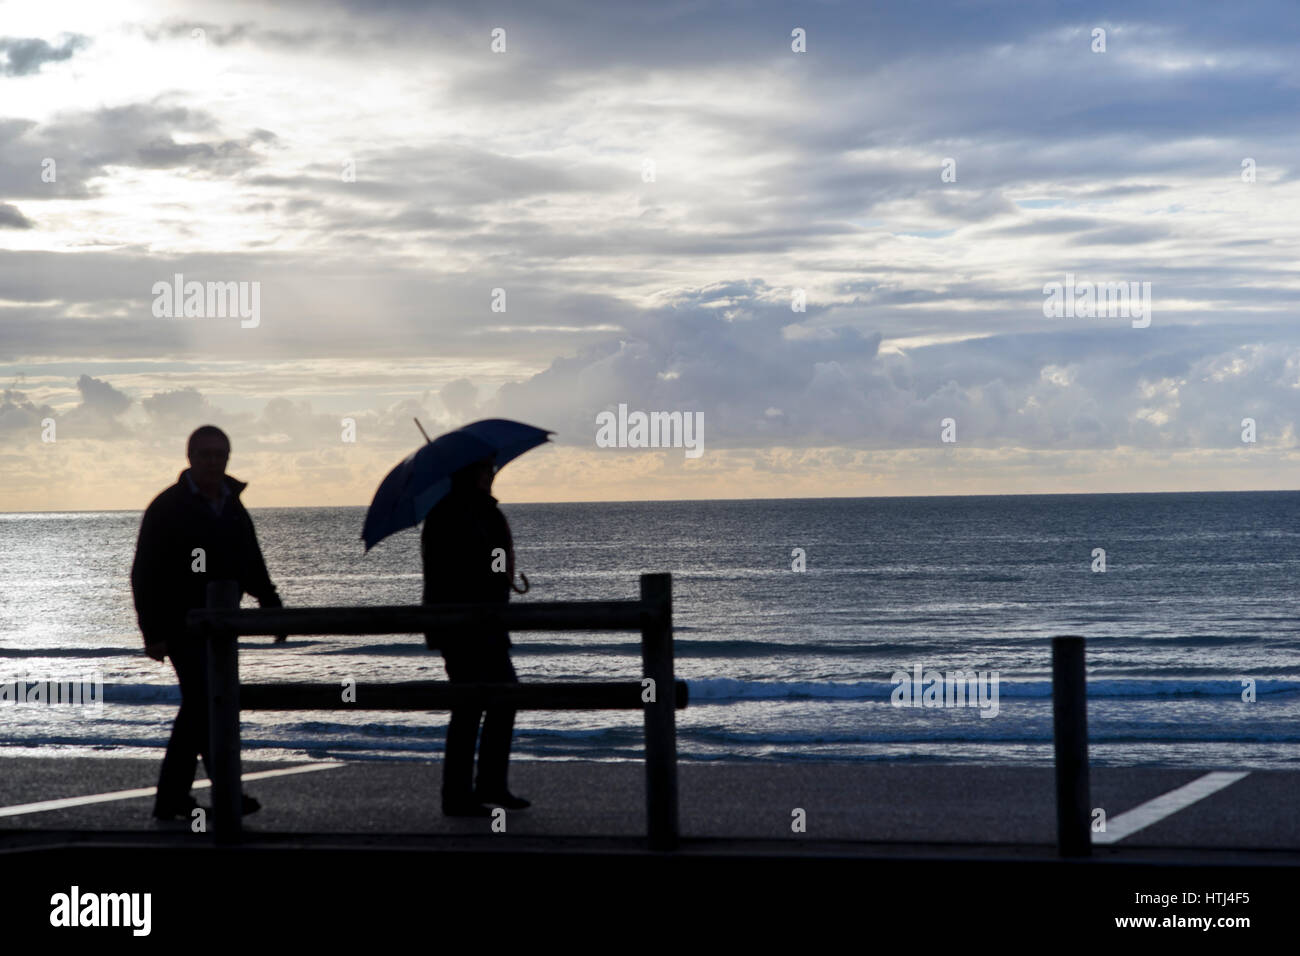 tourists with umbrellas during a rain shower on the promenade at Hardelot beah, Cote d'Opale, France Stock Photo